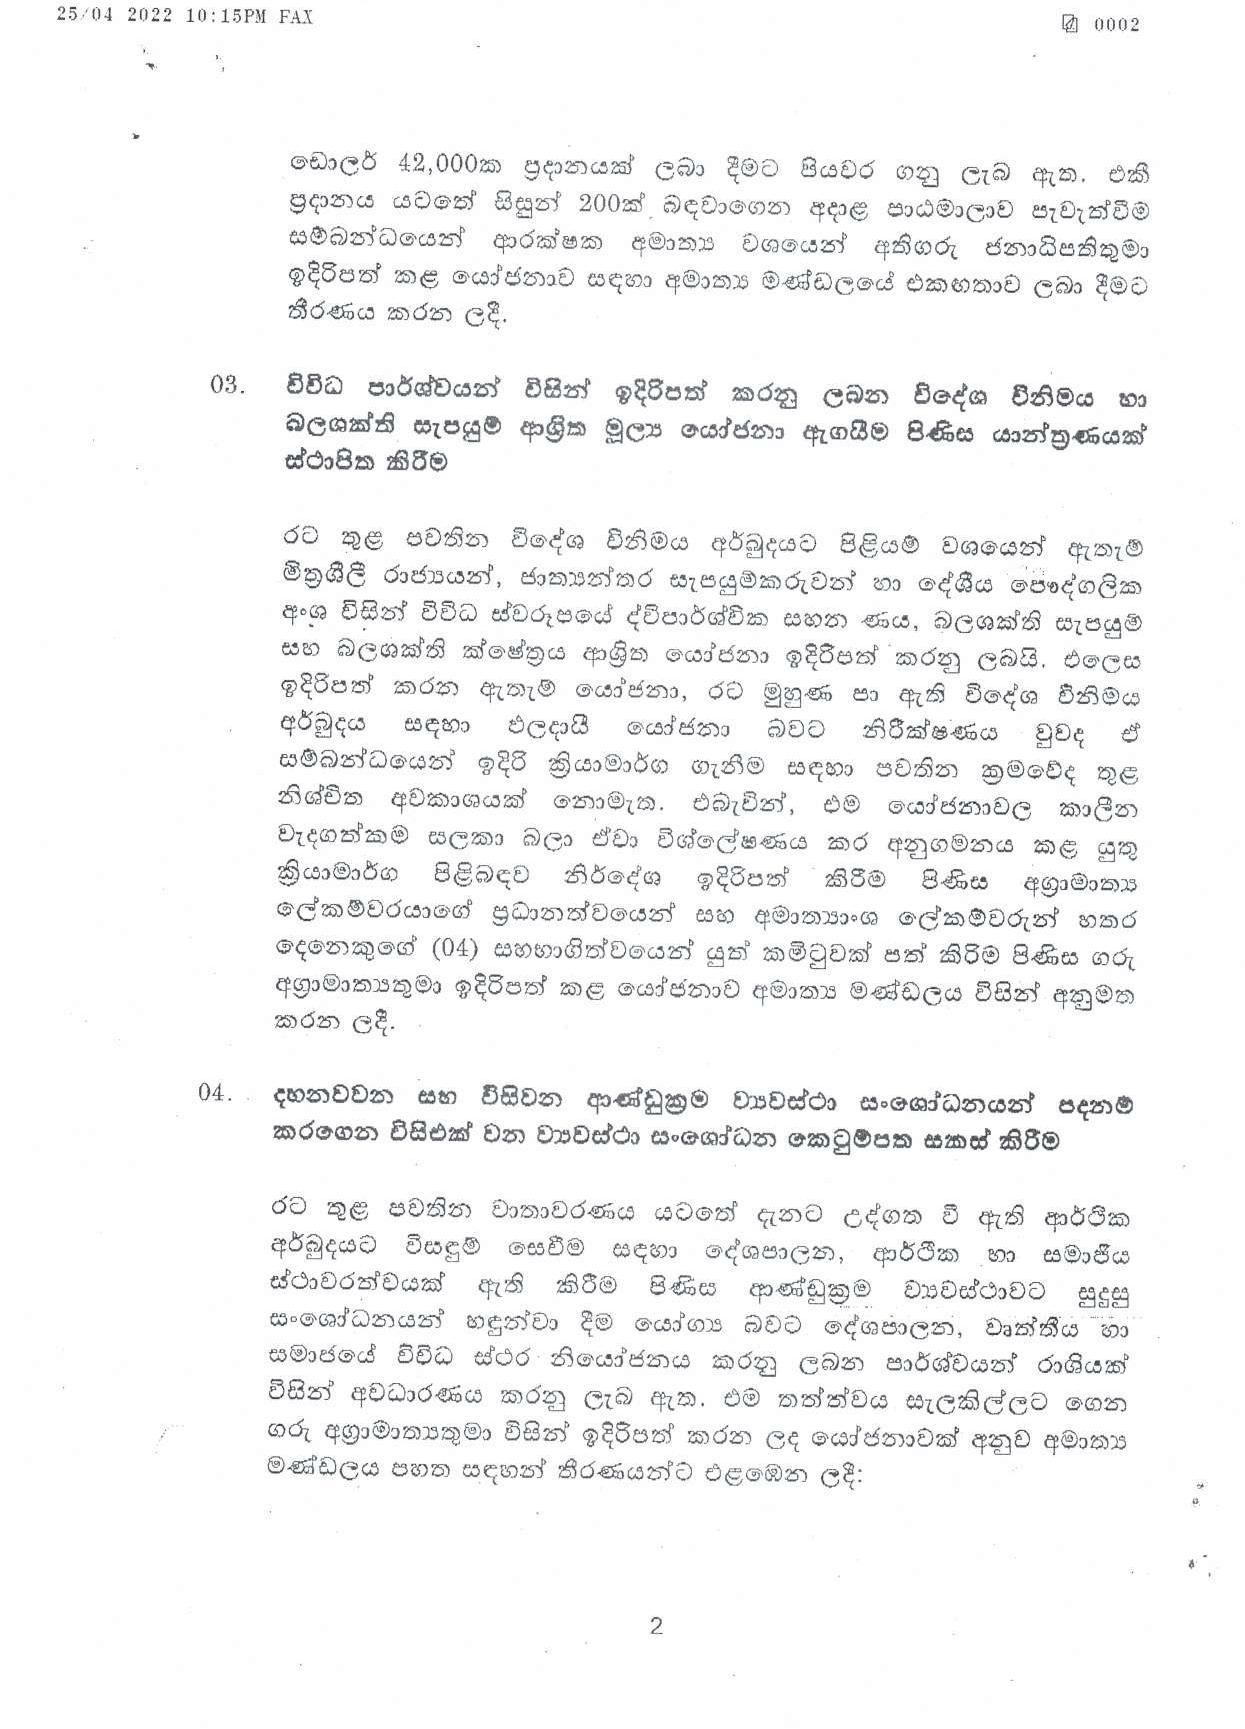 Cabinet Press Breifing on 25.04.2022 page 002